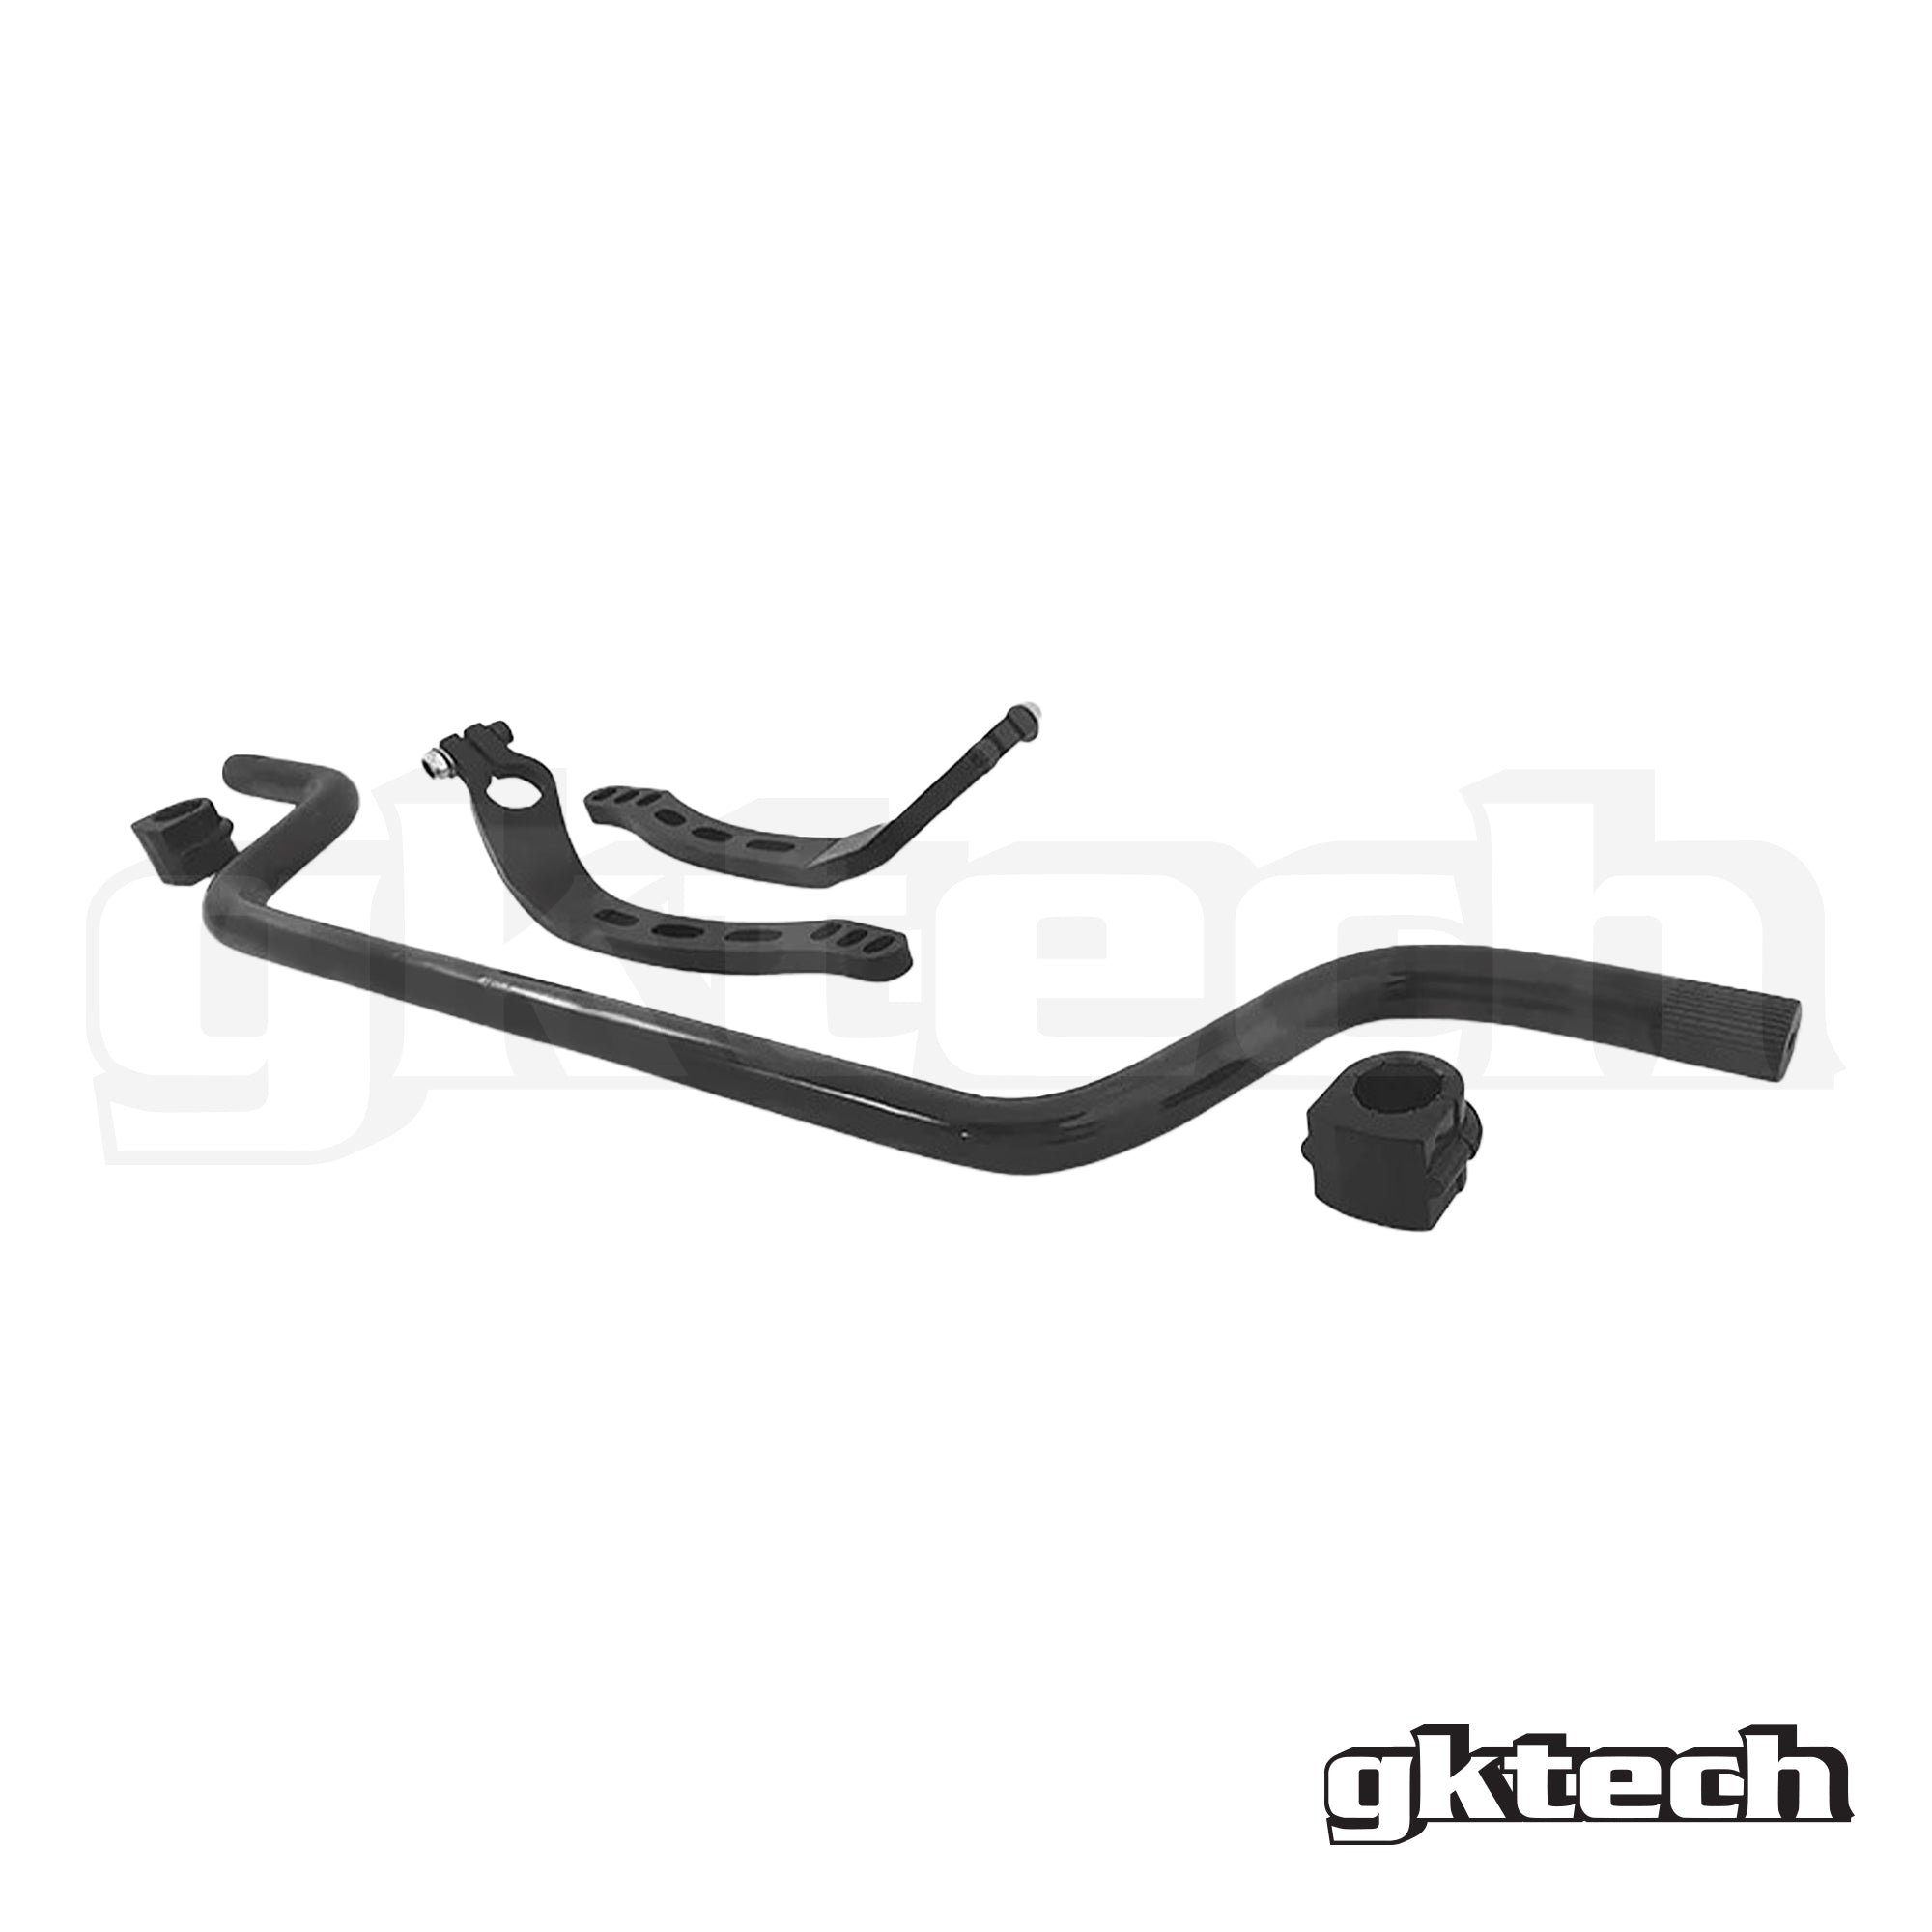 S chassis high clearance adjustable swaybar